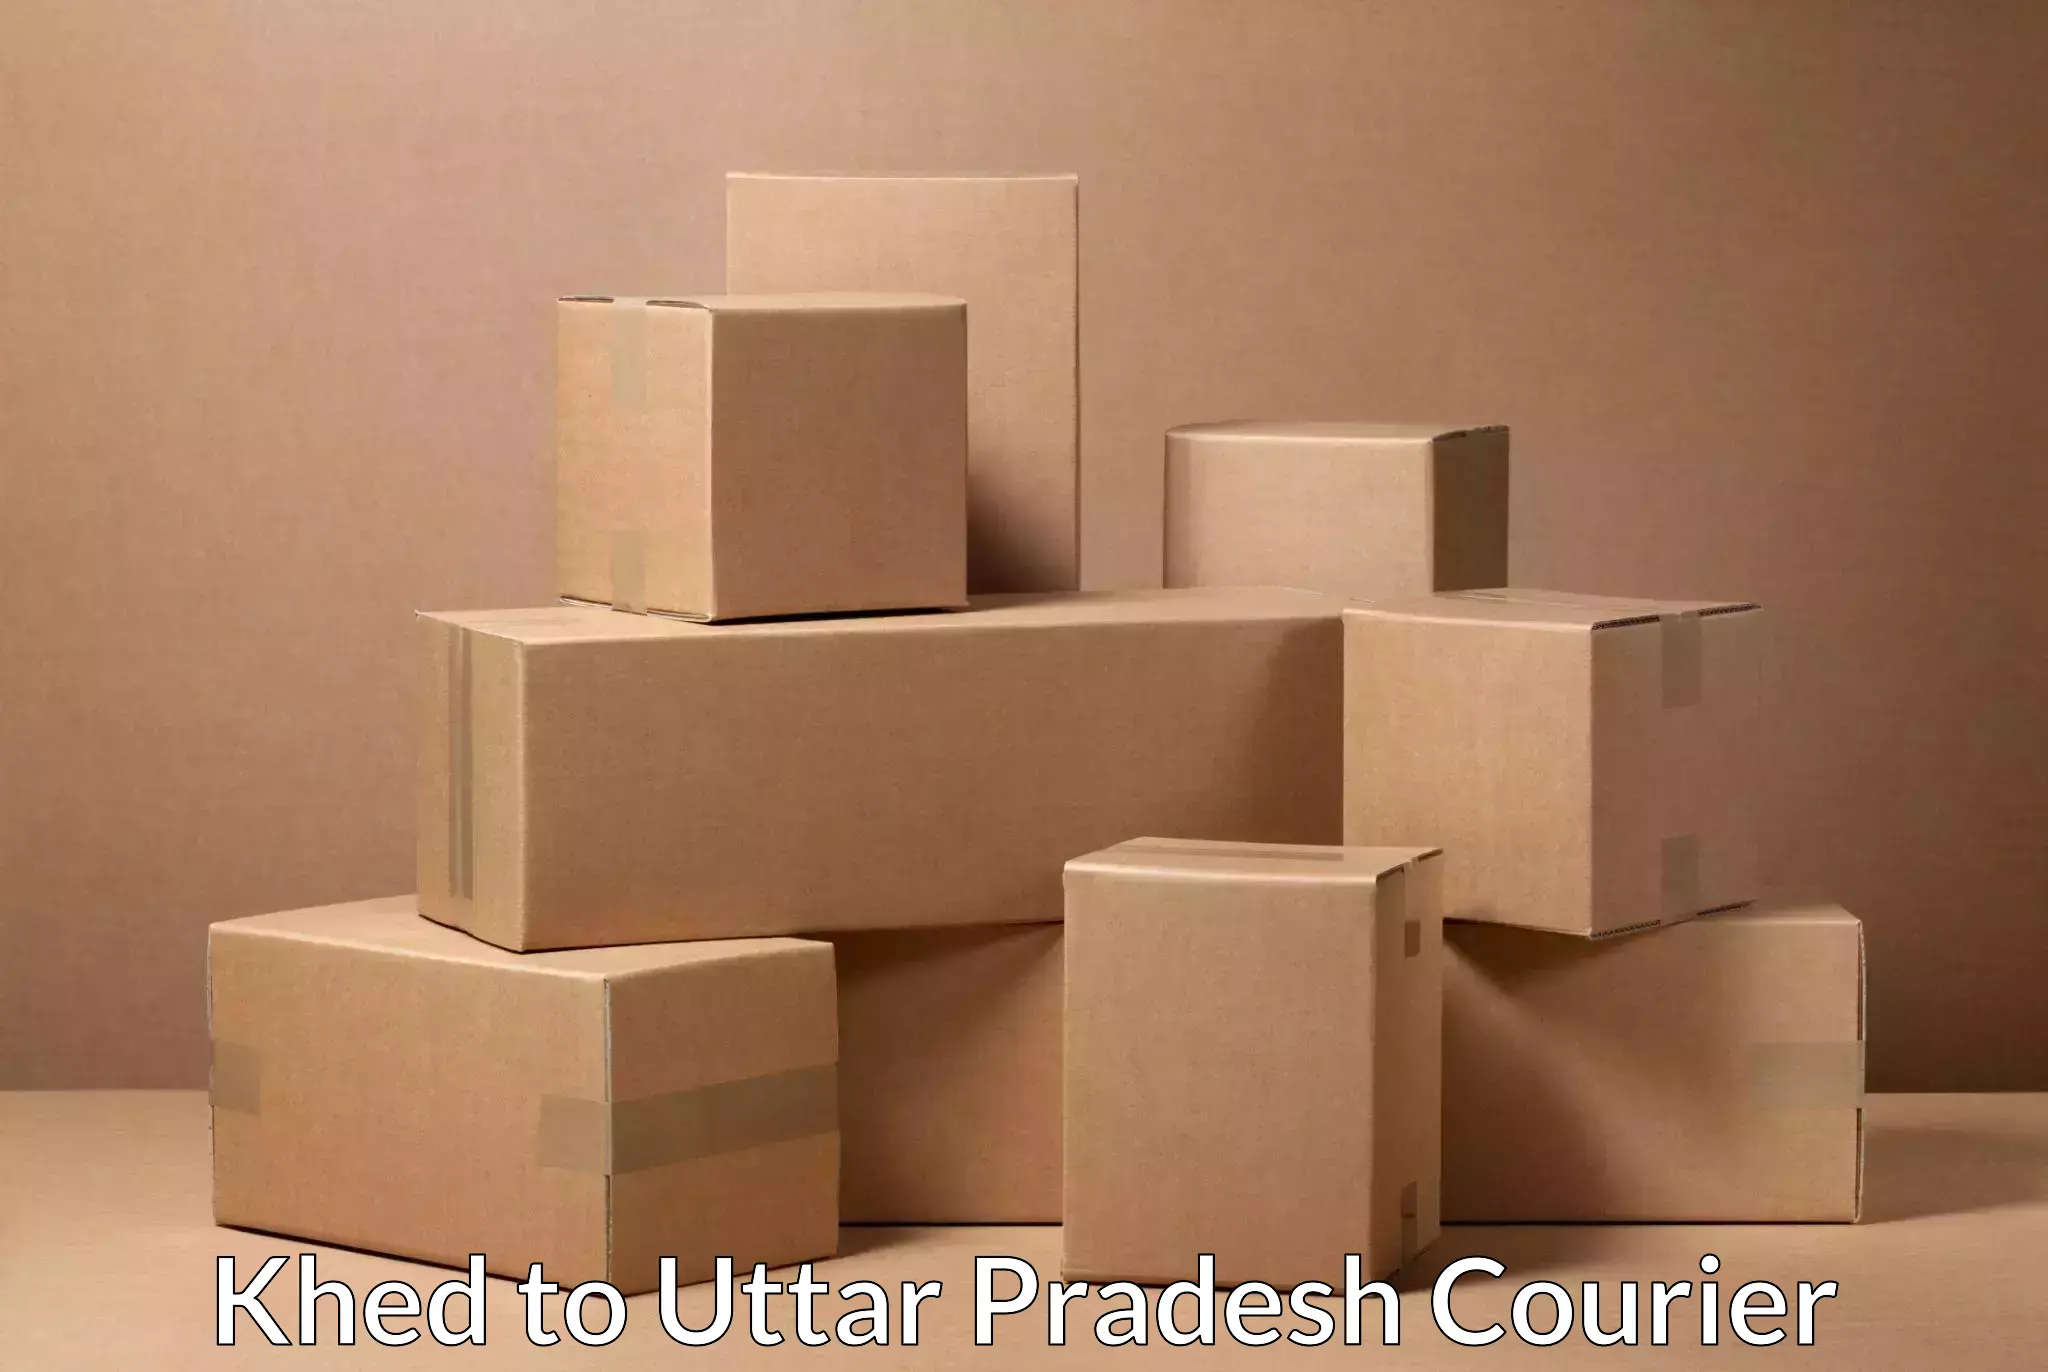 Efficient cargo services Khed to Khalilabad